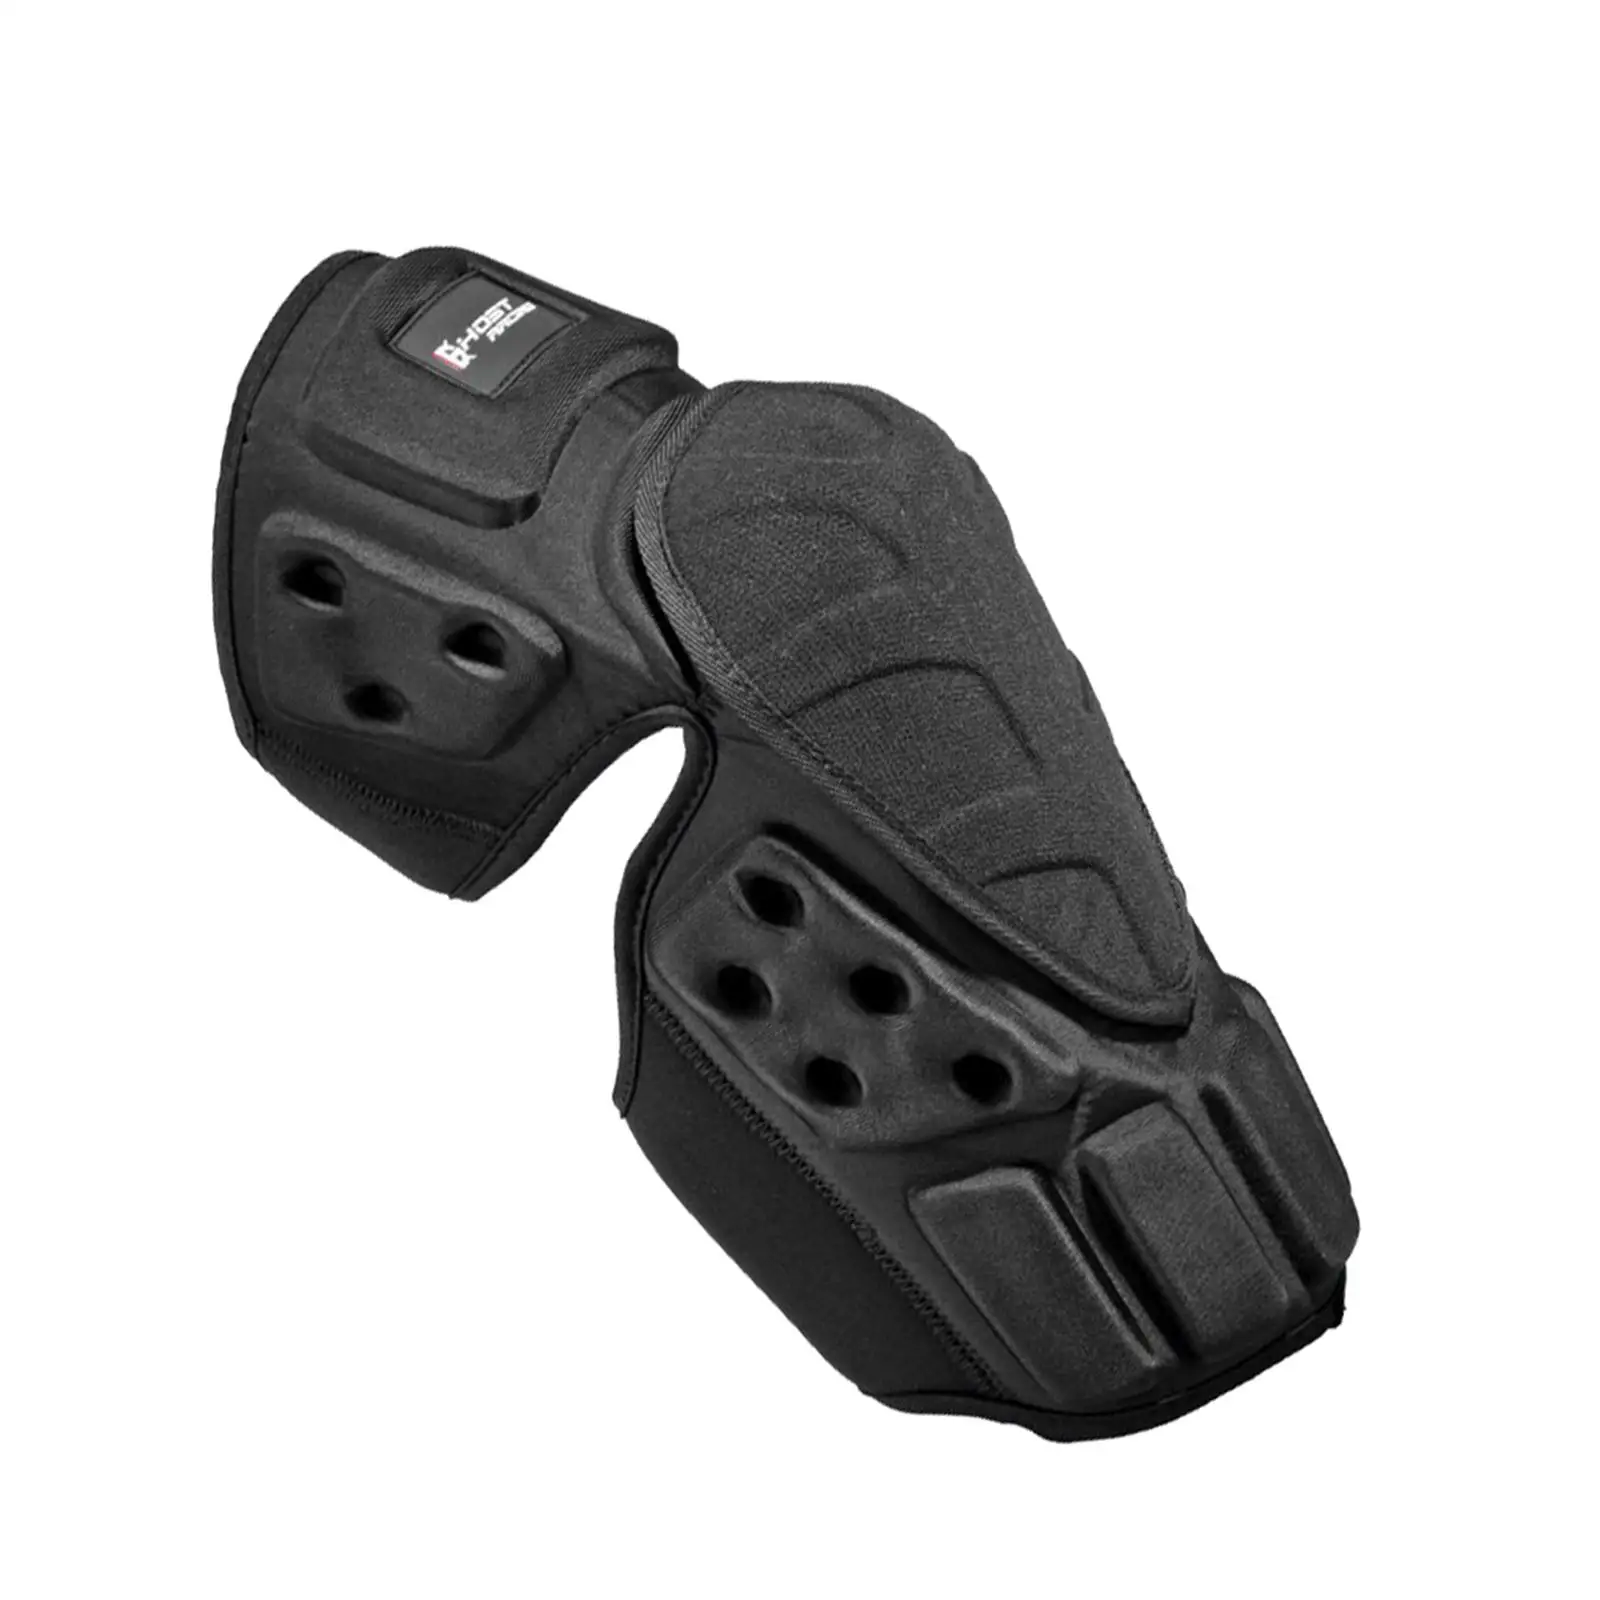 Racing Knee Guards Arm Guards Protective Equipment for Motocross